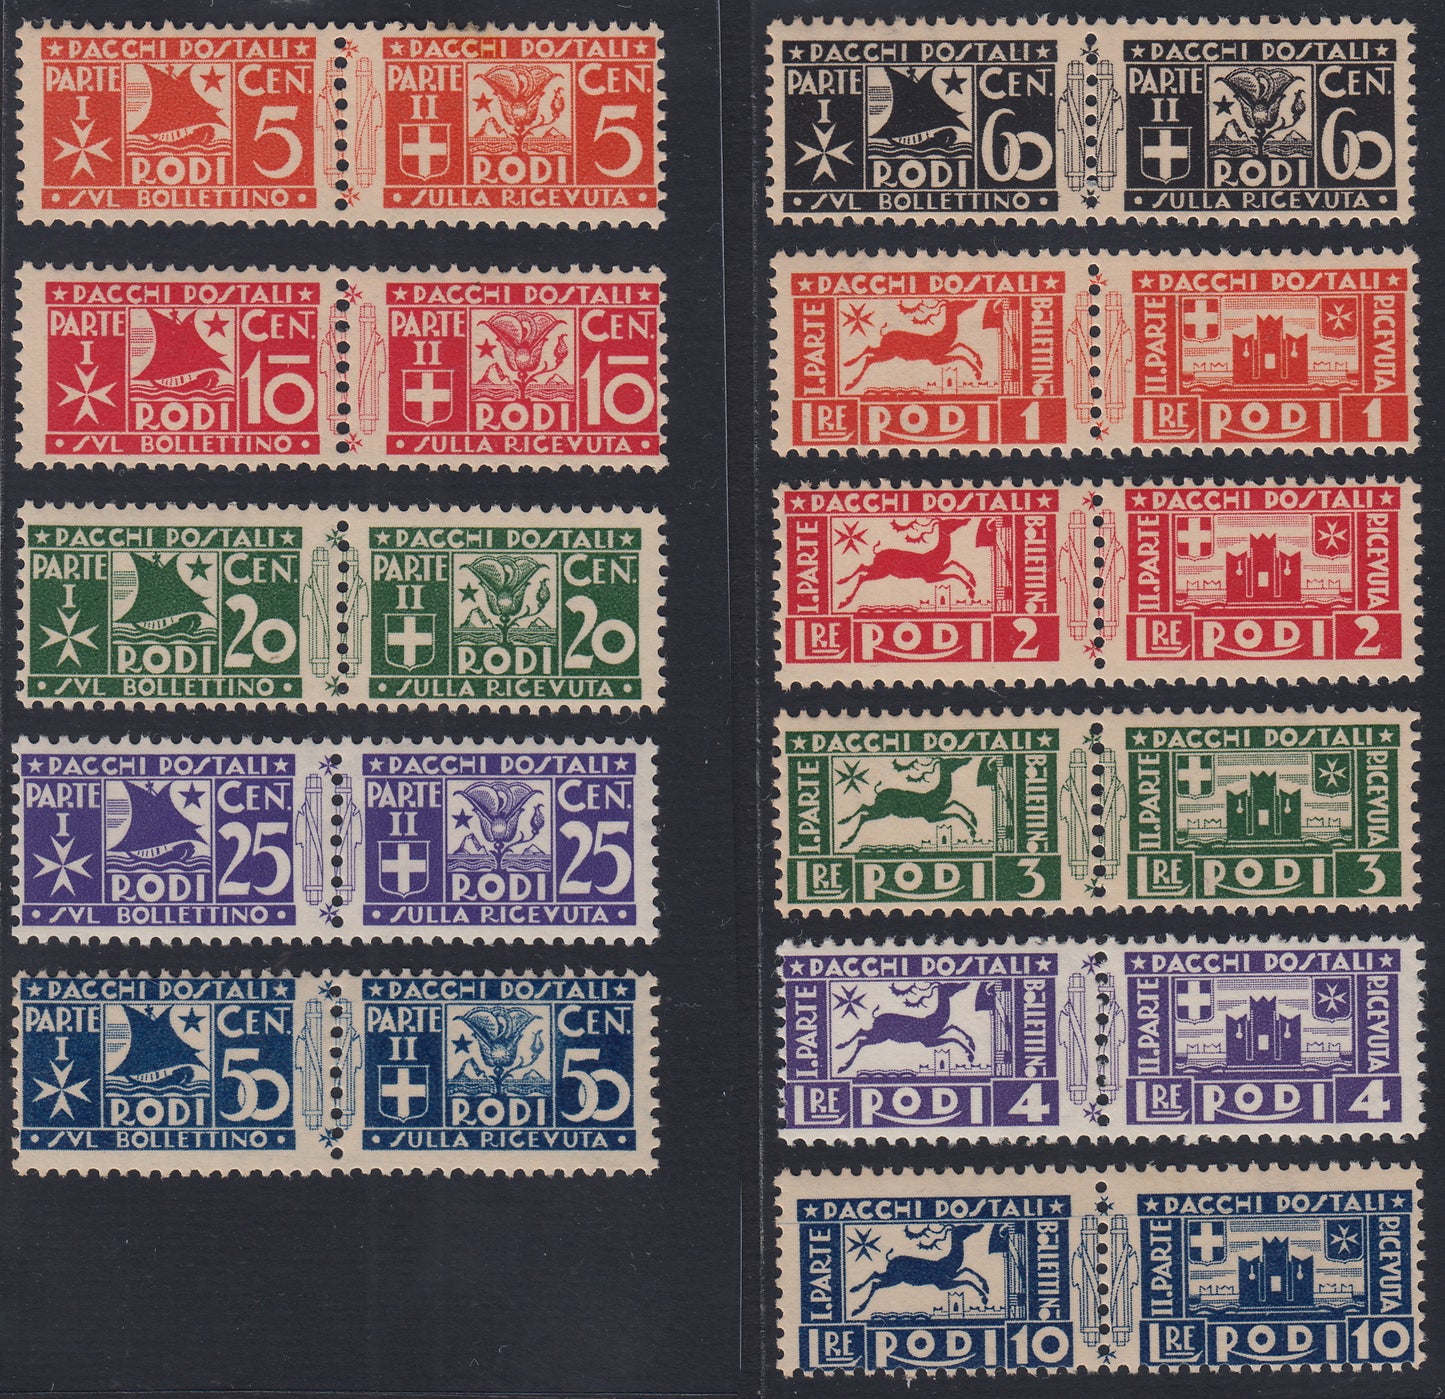 Egeo26 - 1934 - postal parcels with various subjects, series of 11 new values ​​with intact rubber (1/11) 